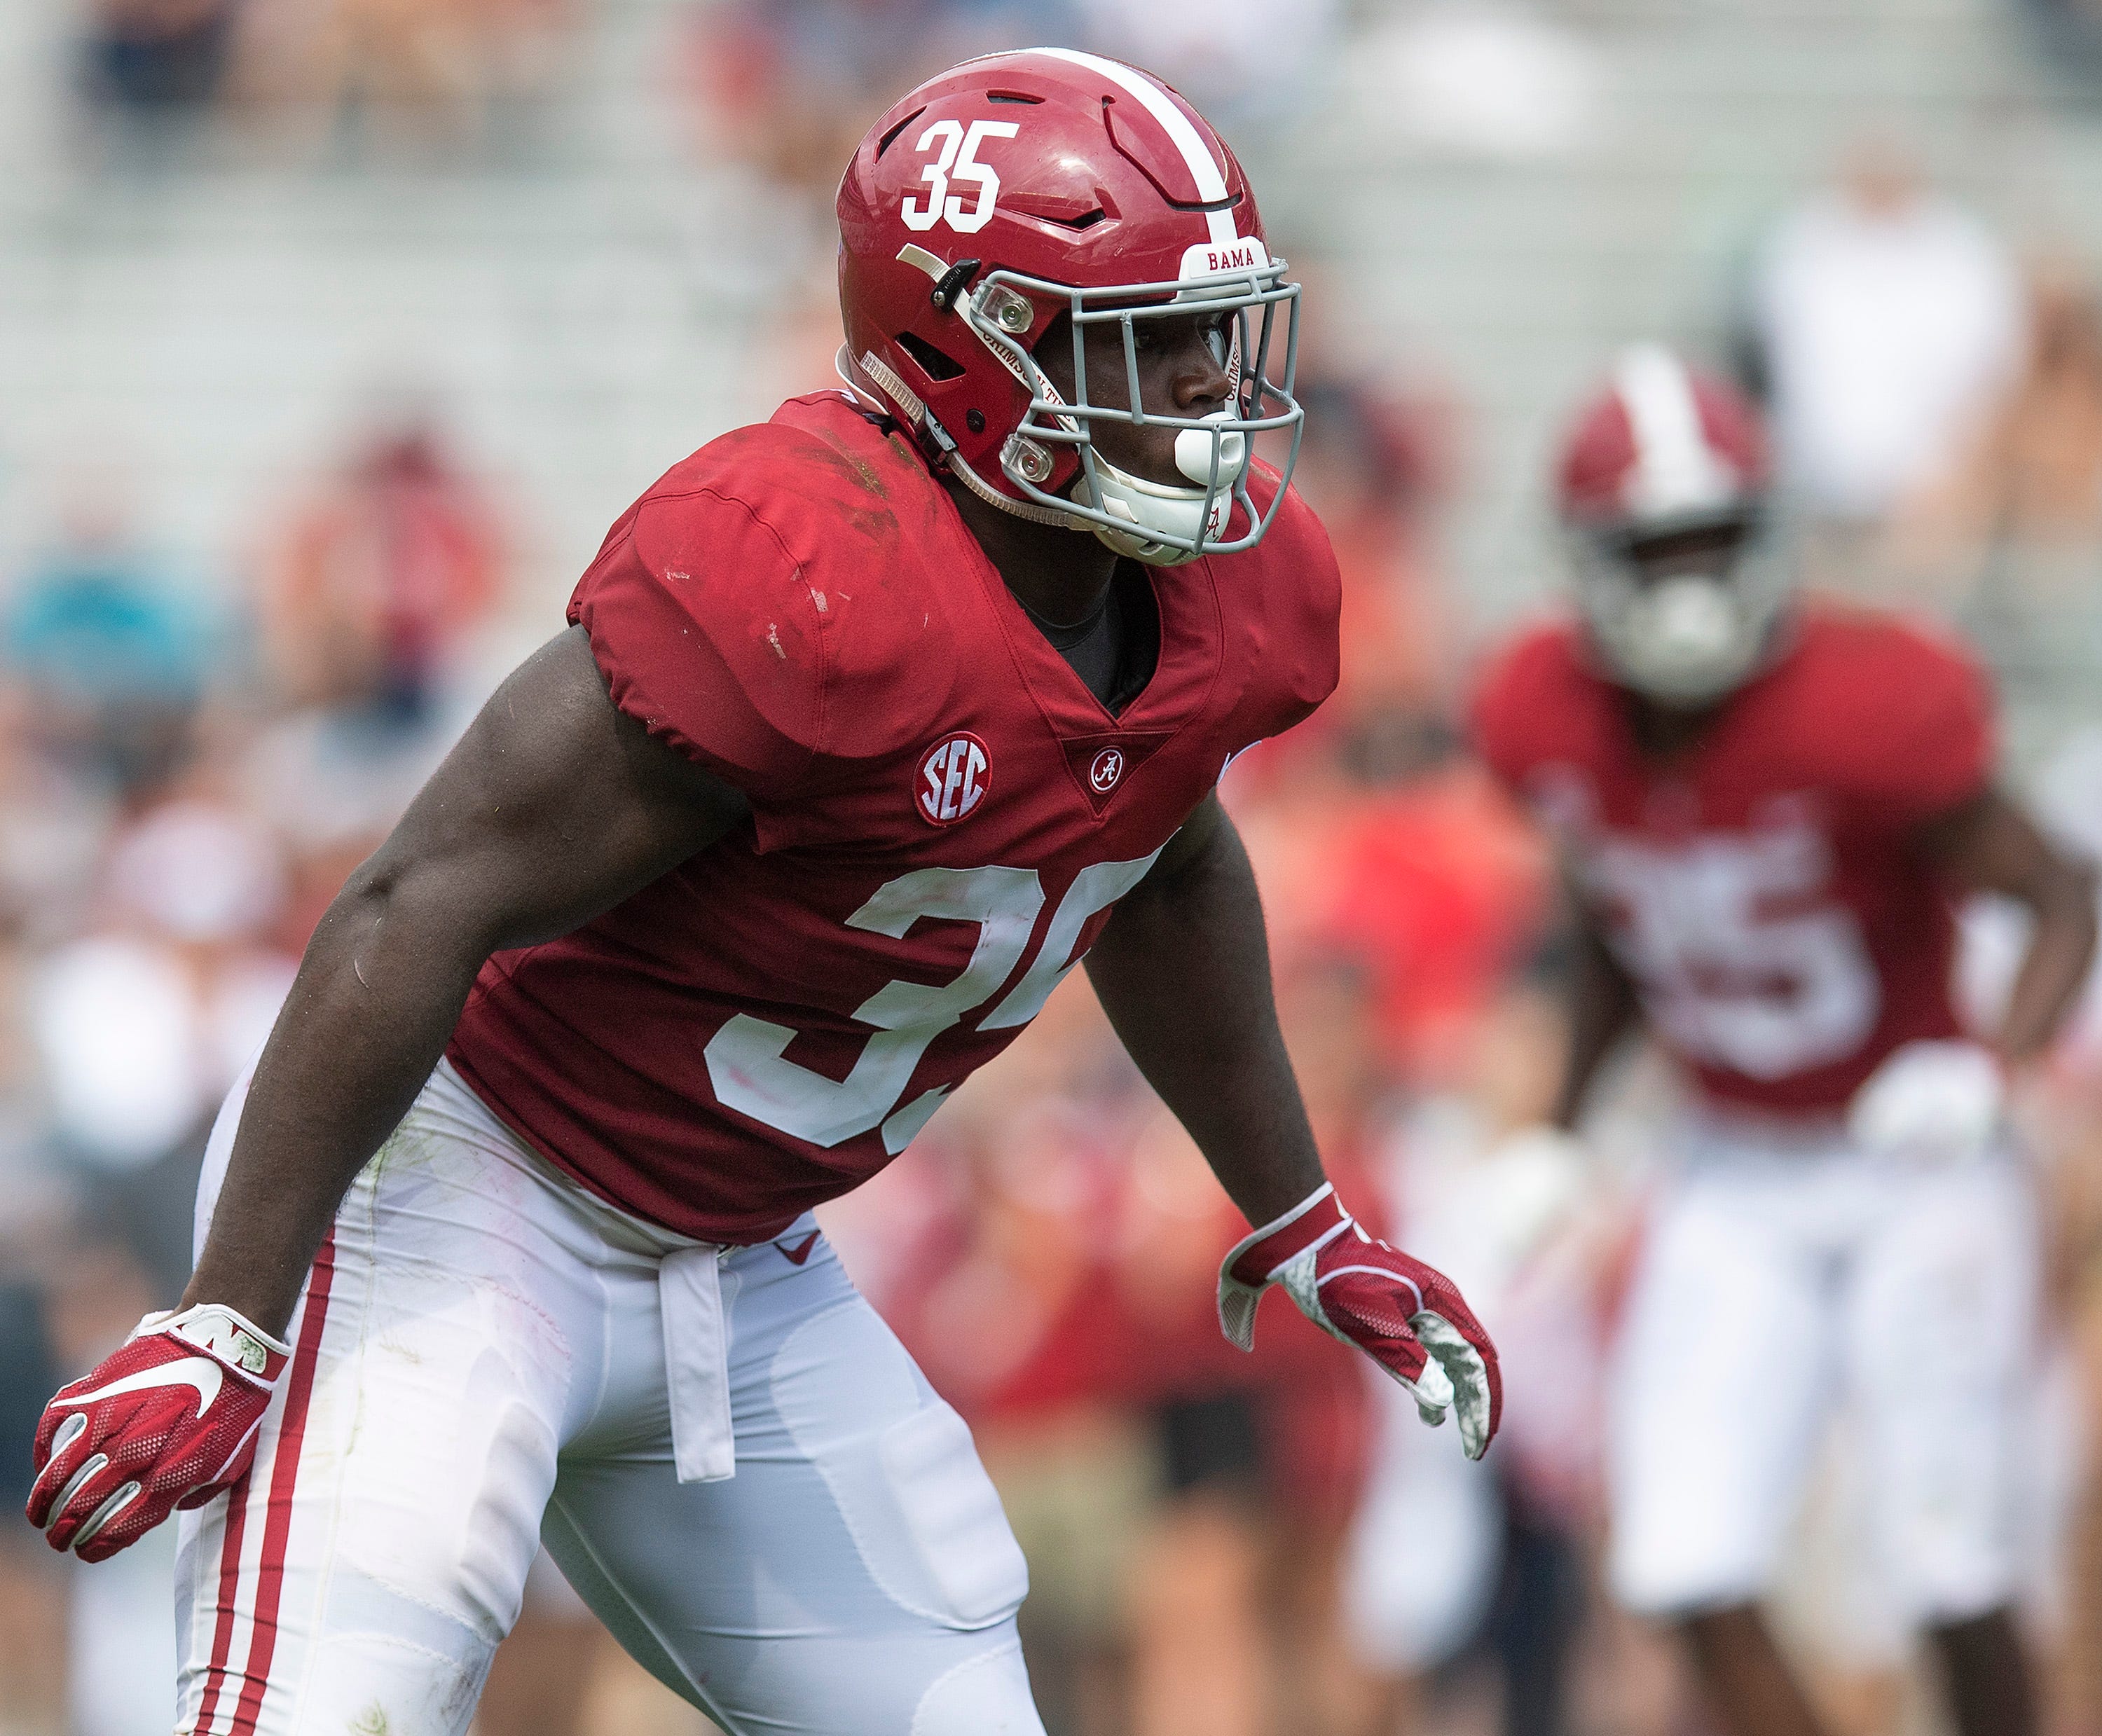 Prep coaches believe Alabama freshmen LB are ready for starting opportunity